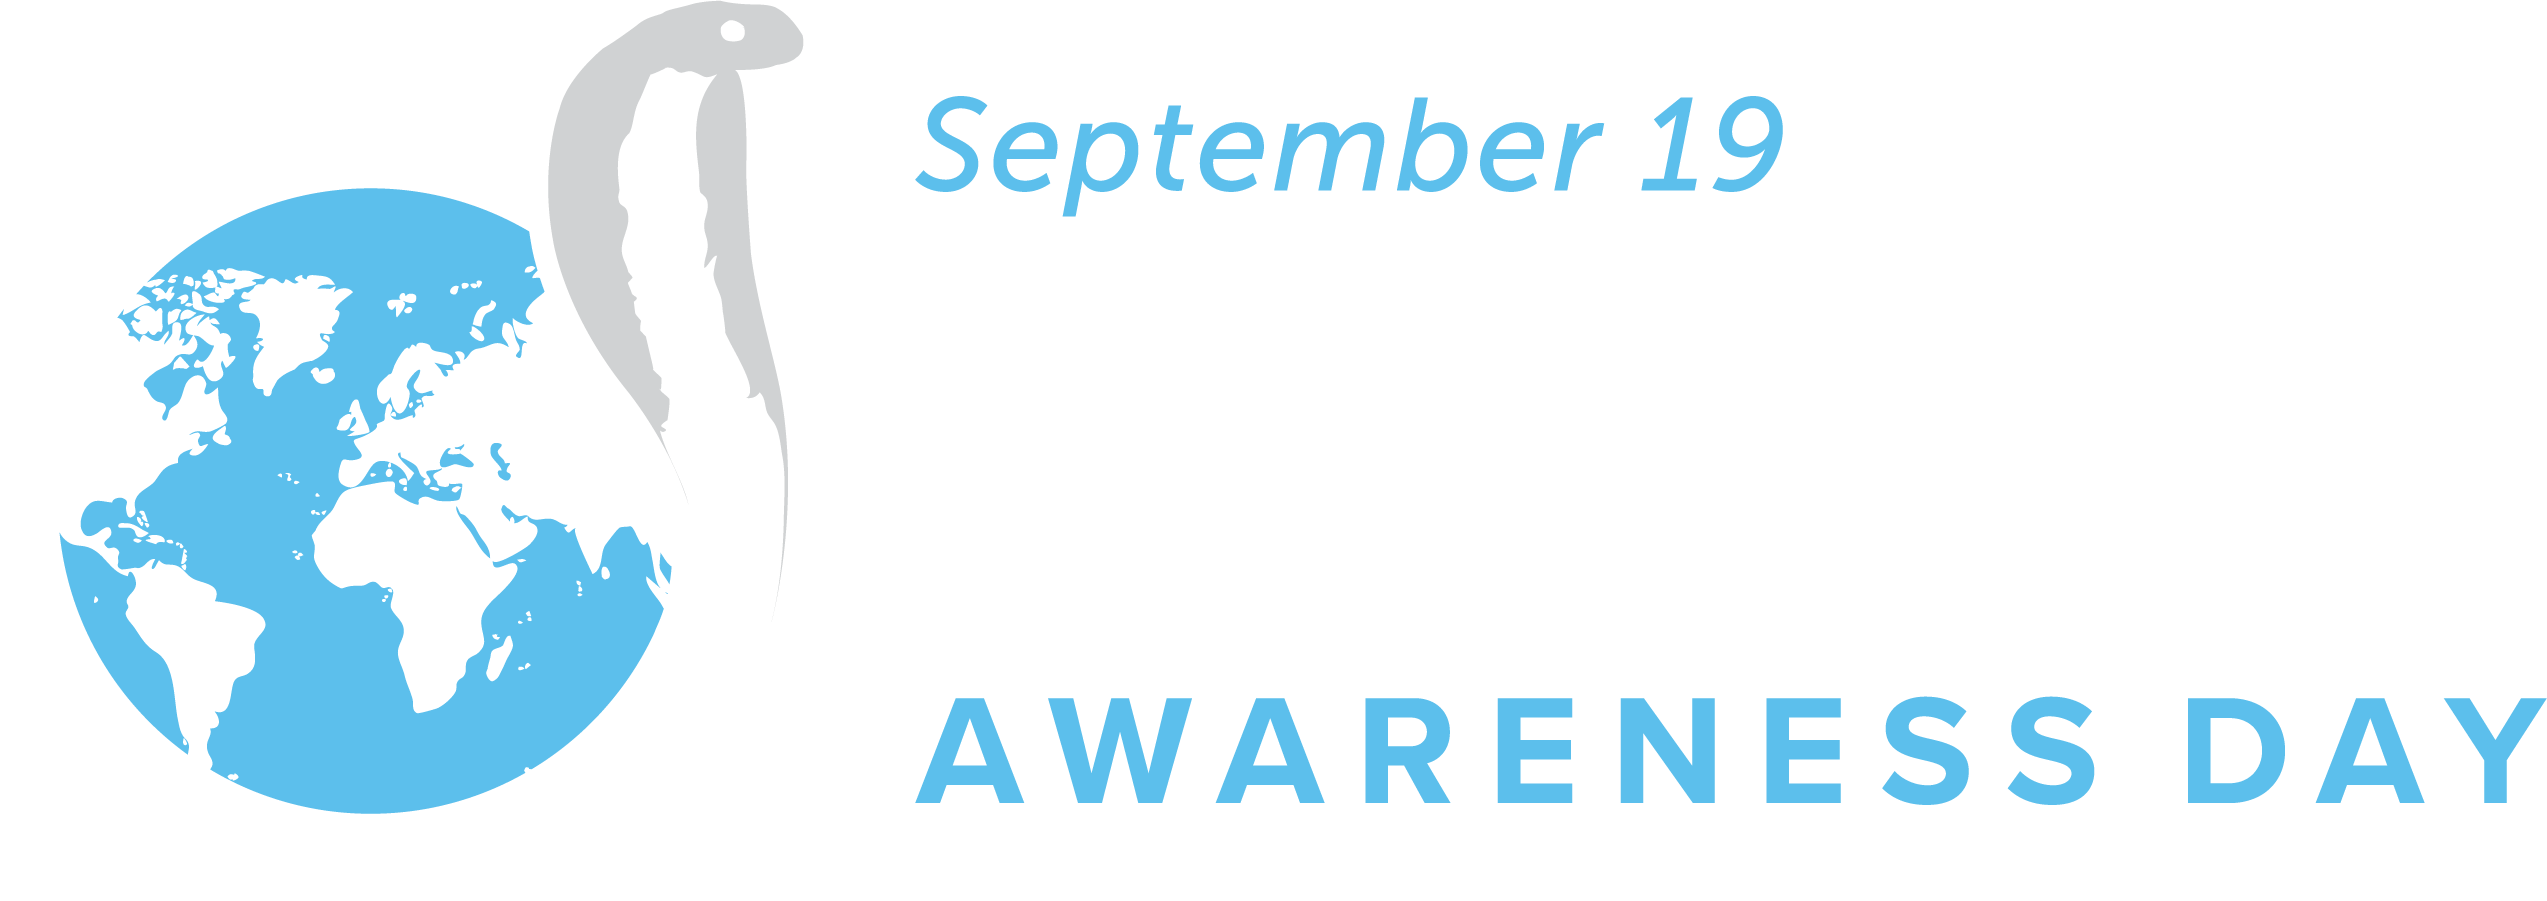 To Die for Logo - International Snakebite Awareness Day. Minutes to Die